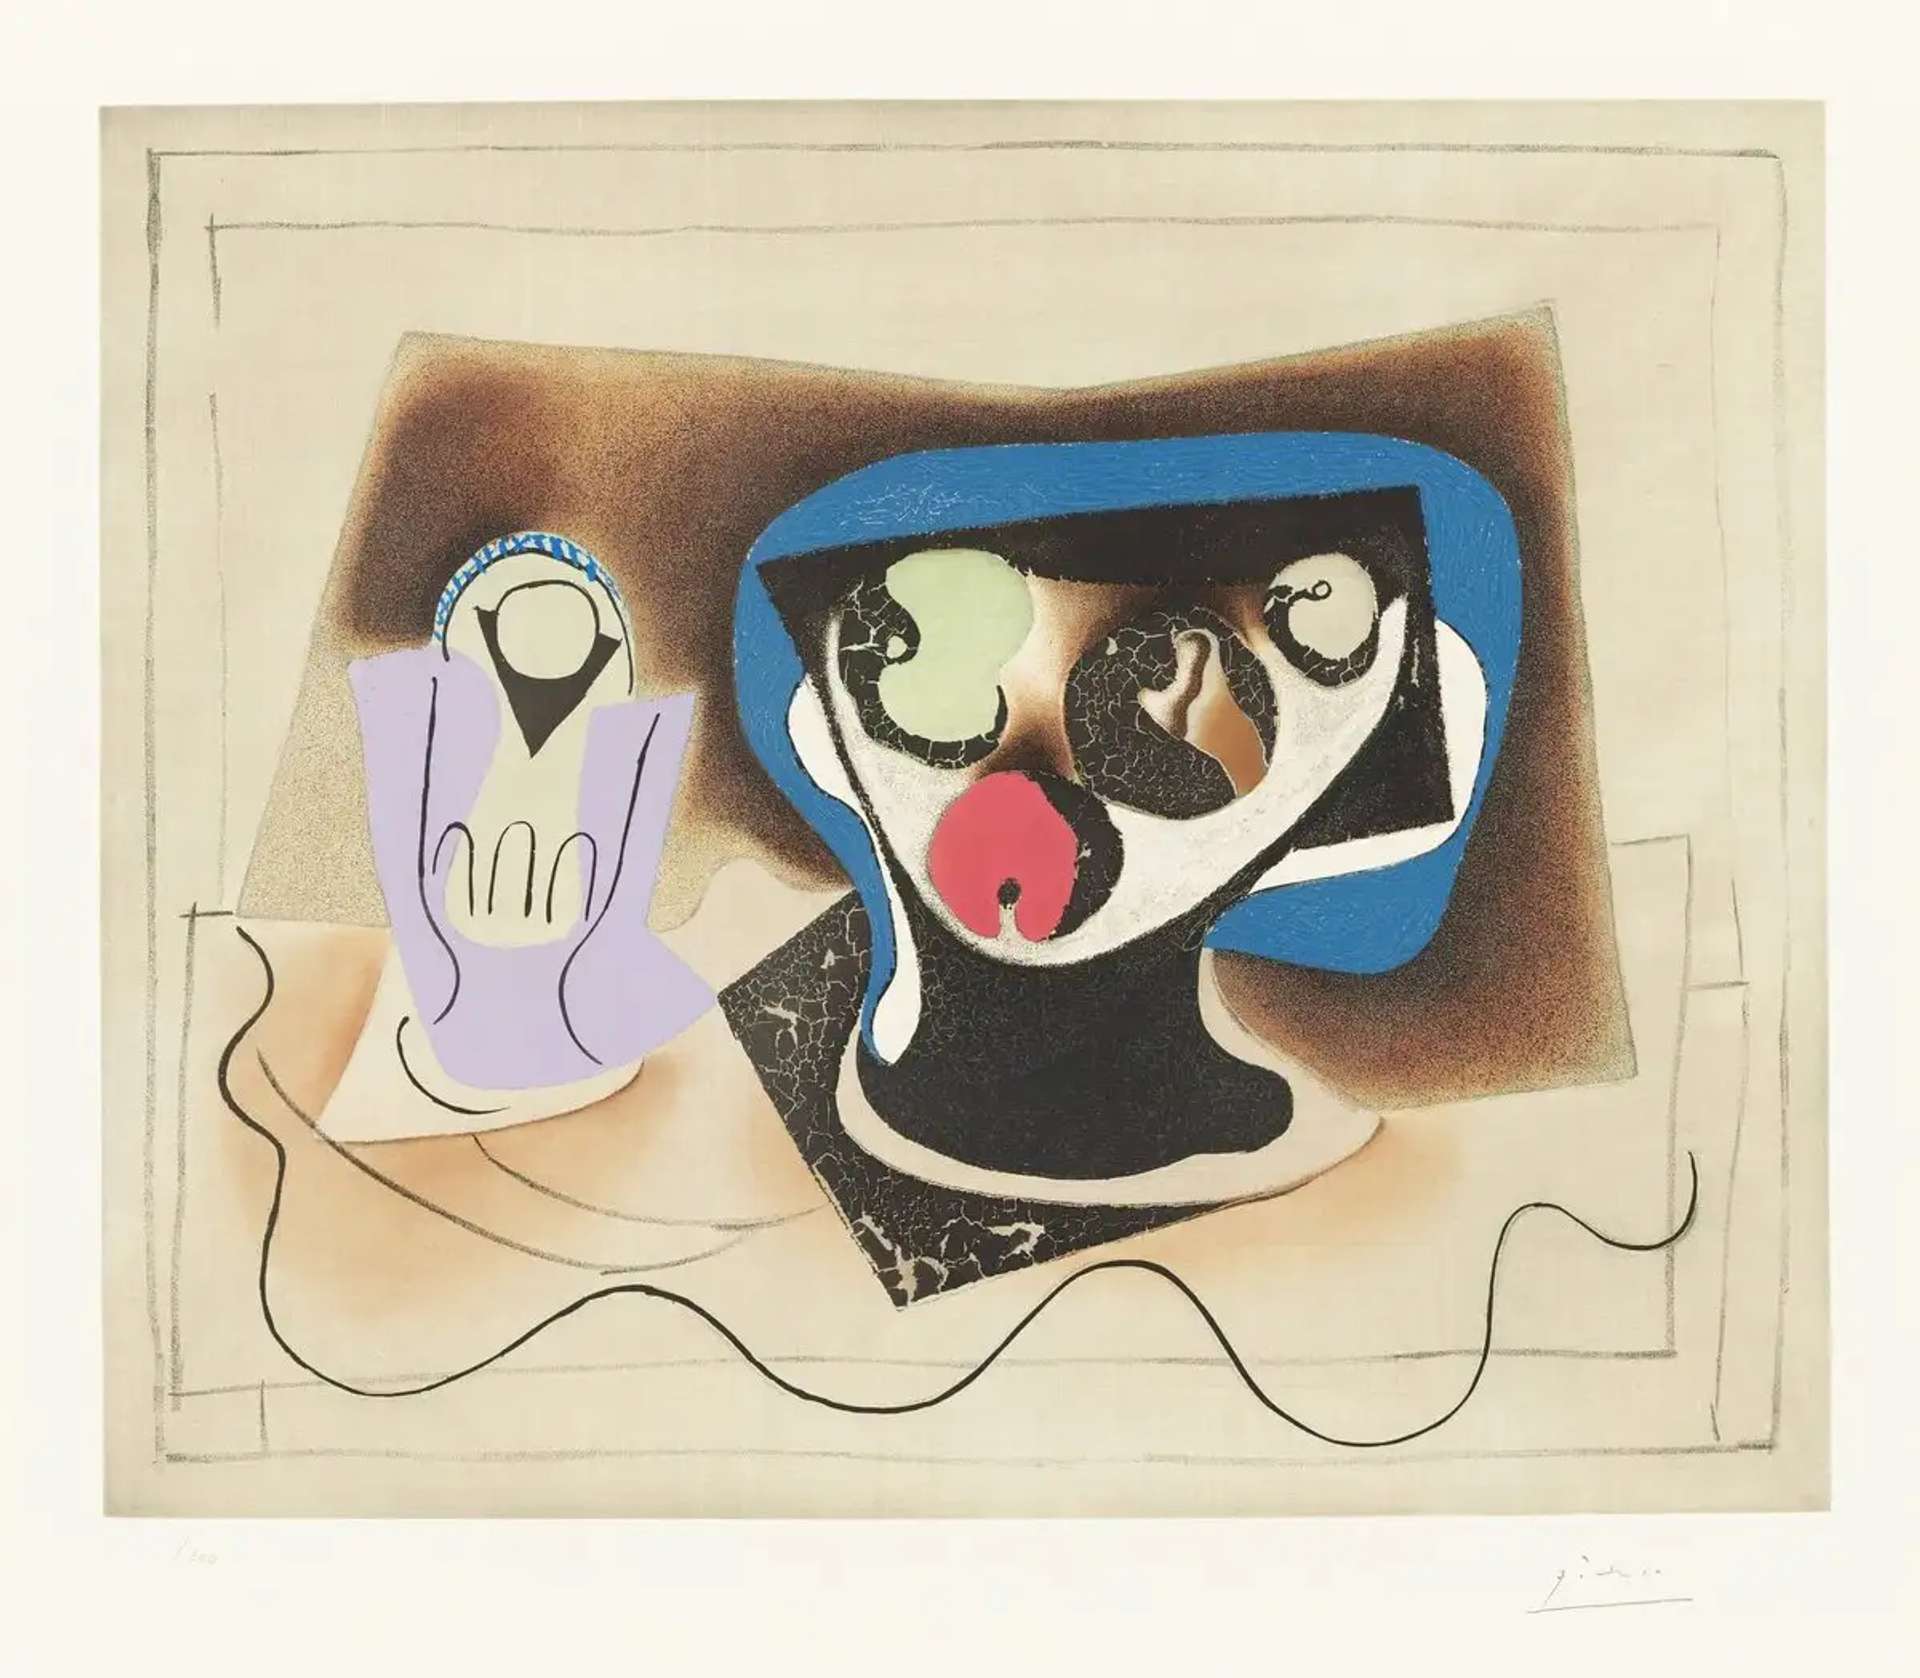 The Master of Printmaking: Pablo Picasso's Legacy in the World of Print